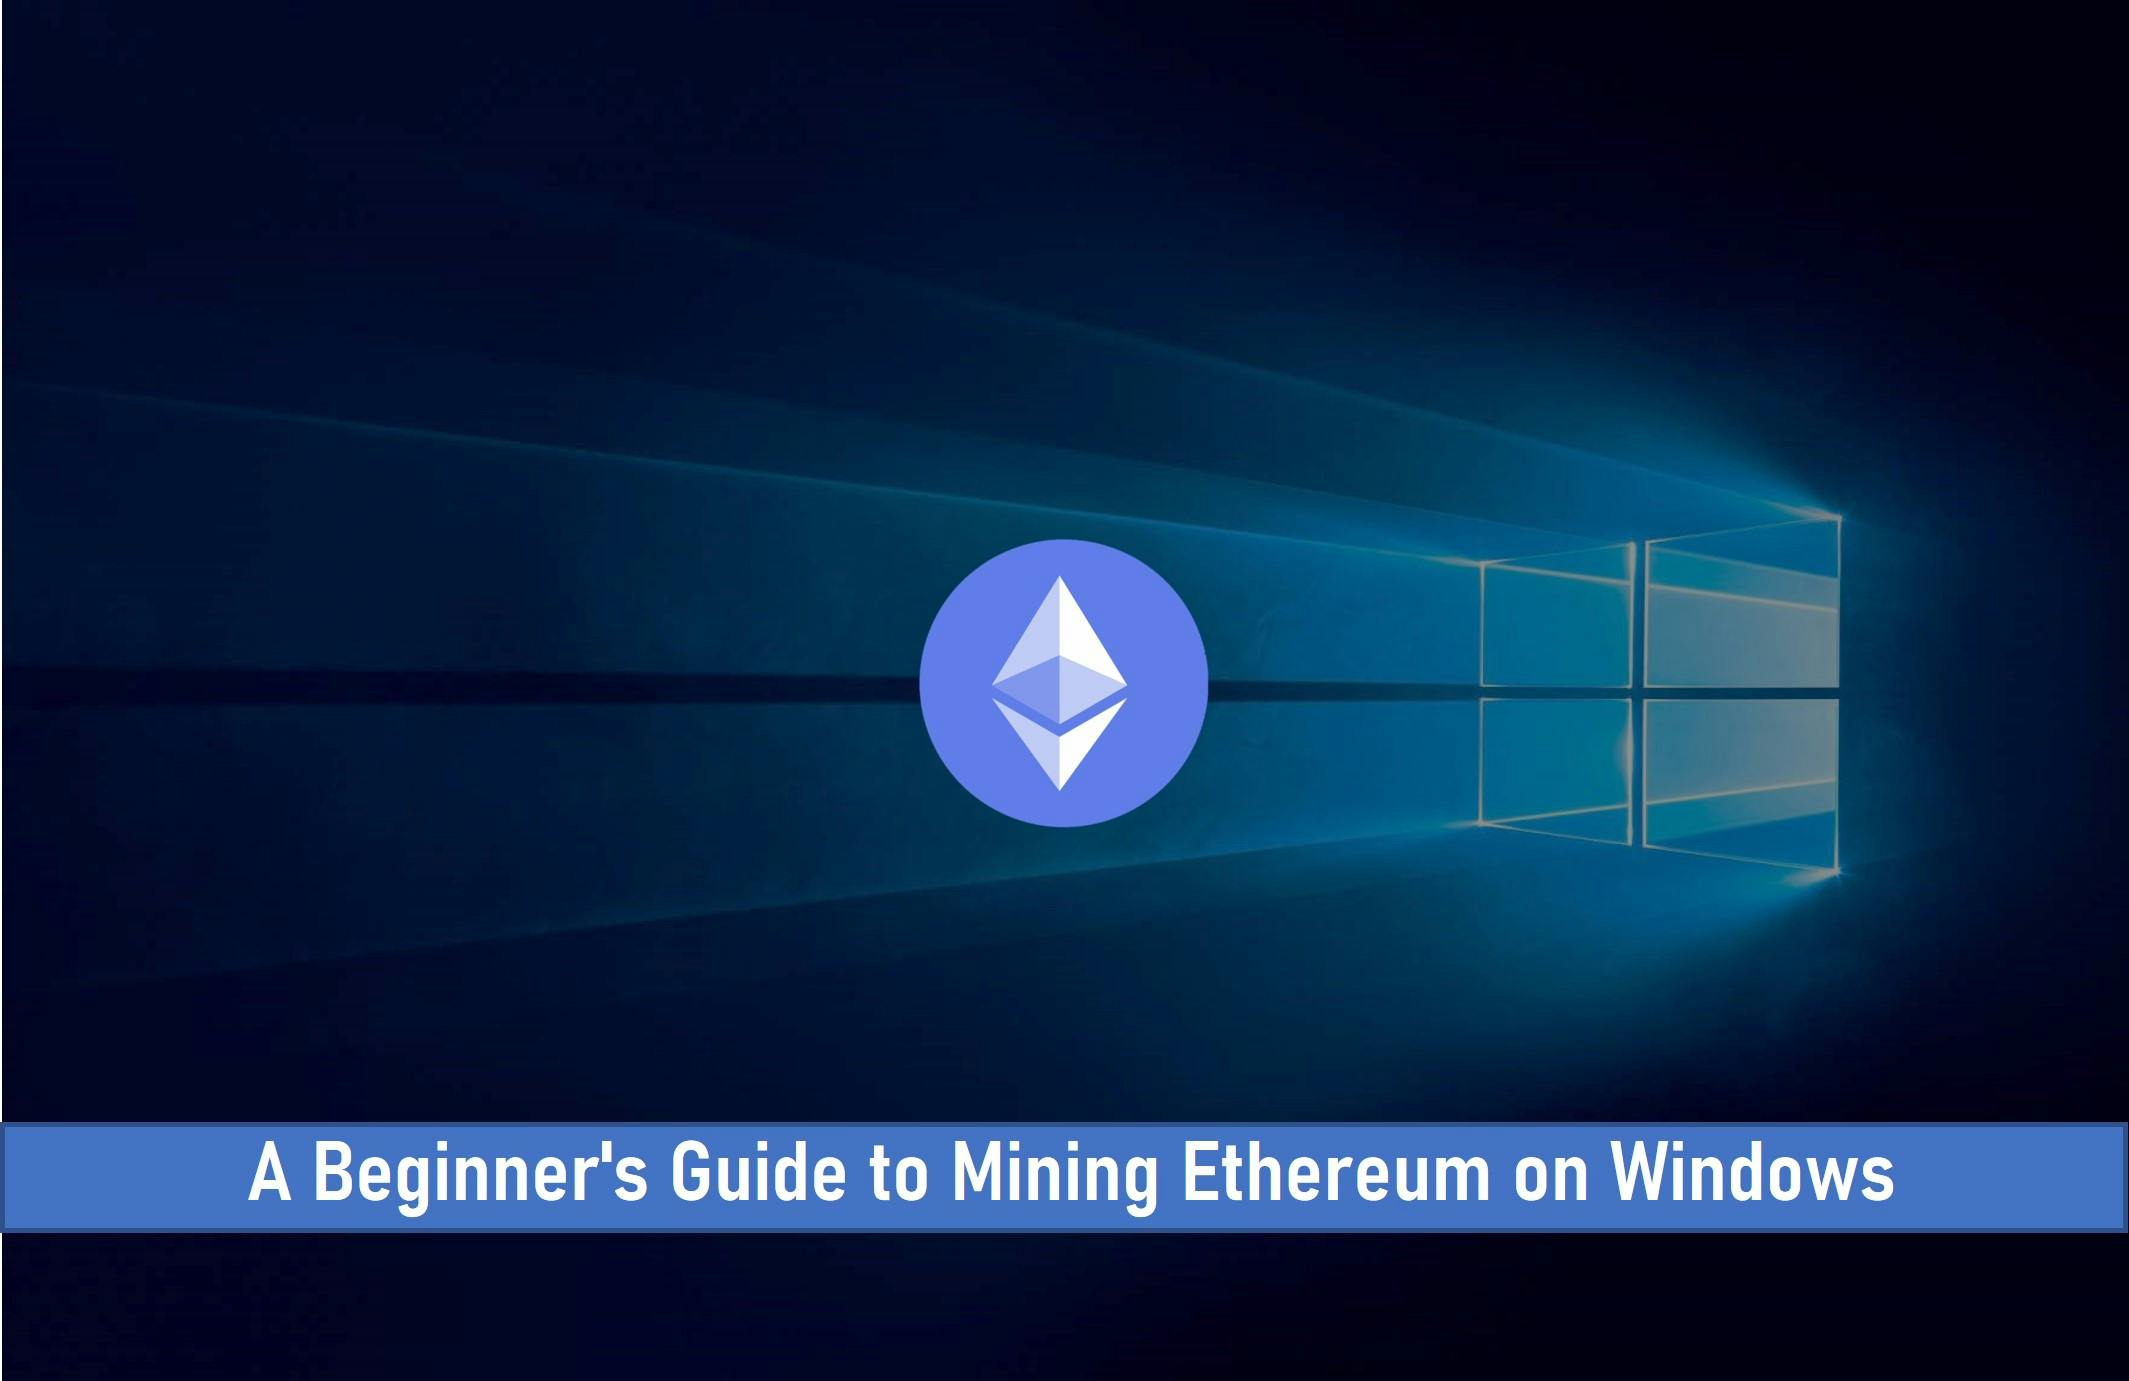 A Beginner’s Guide to Mining Ethereum on Windows